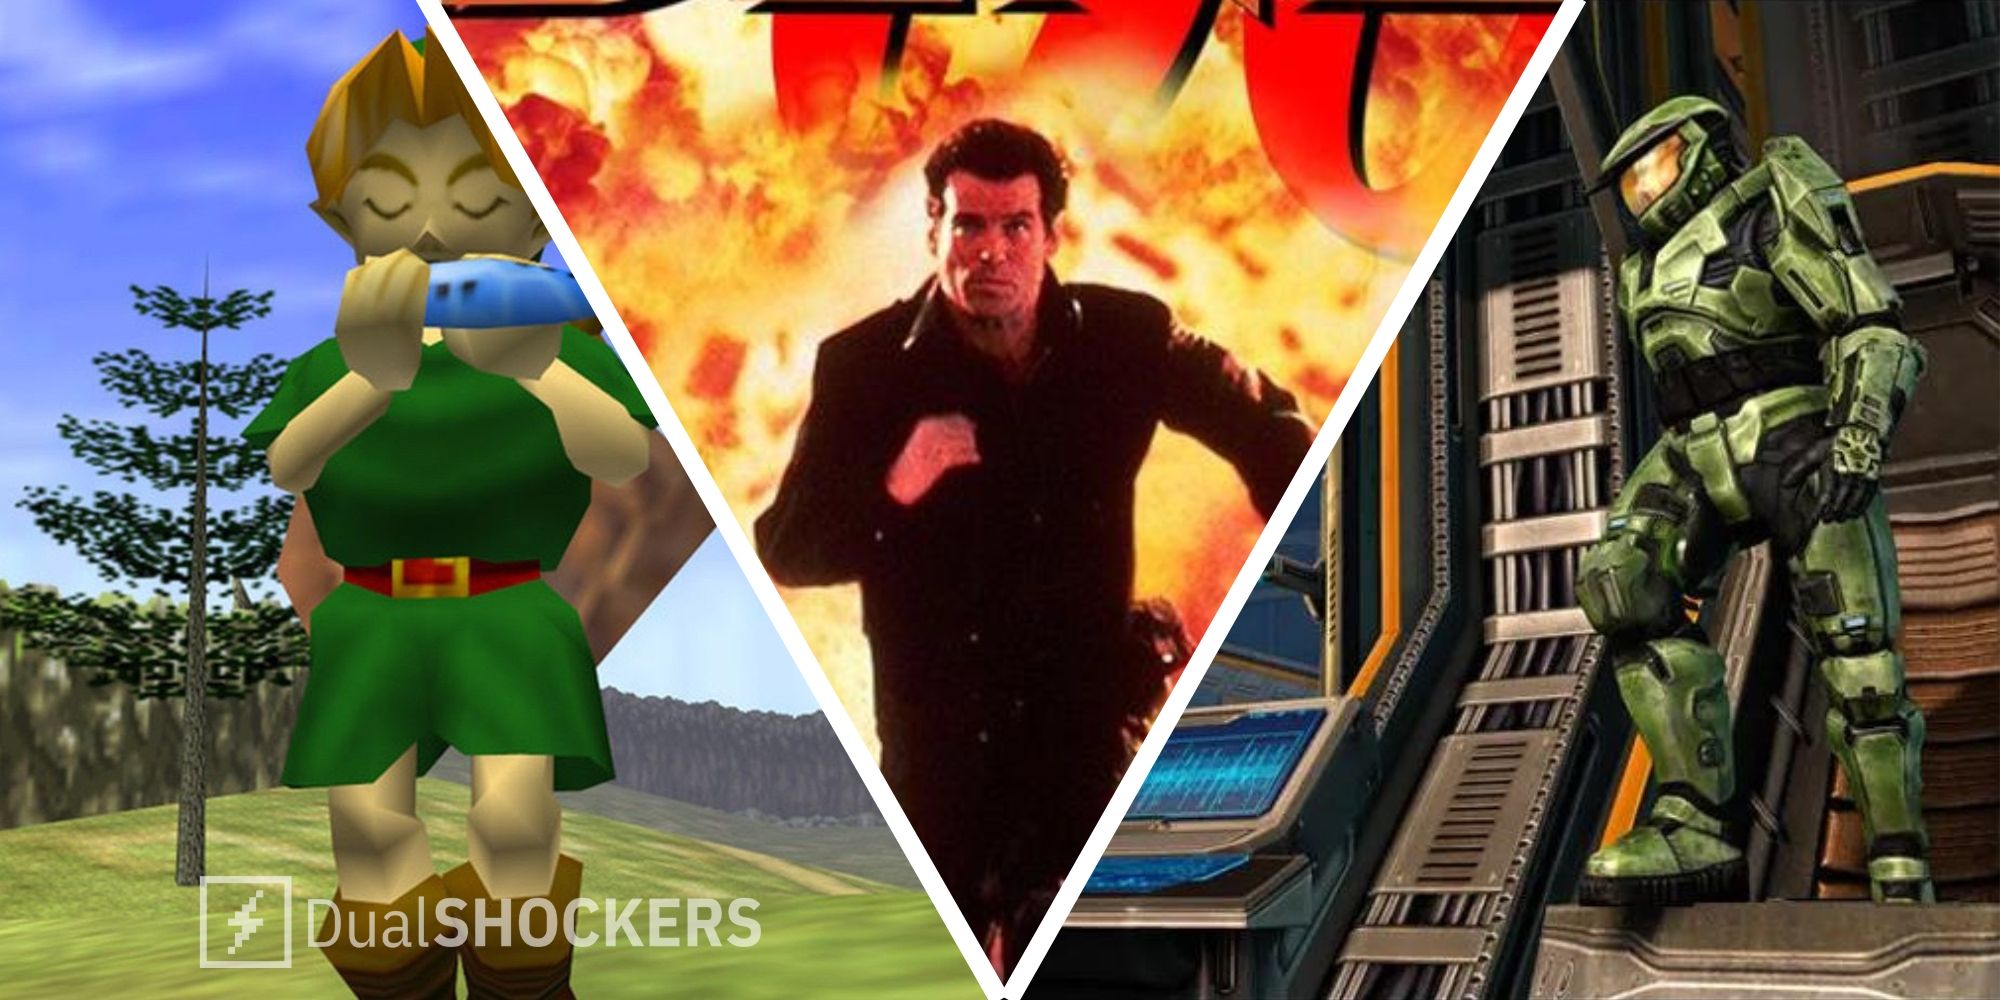 10 Hardest Levels In Gaming, Ranked